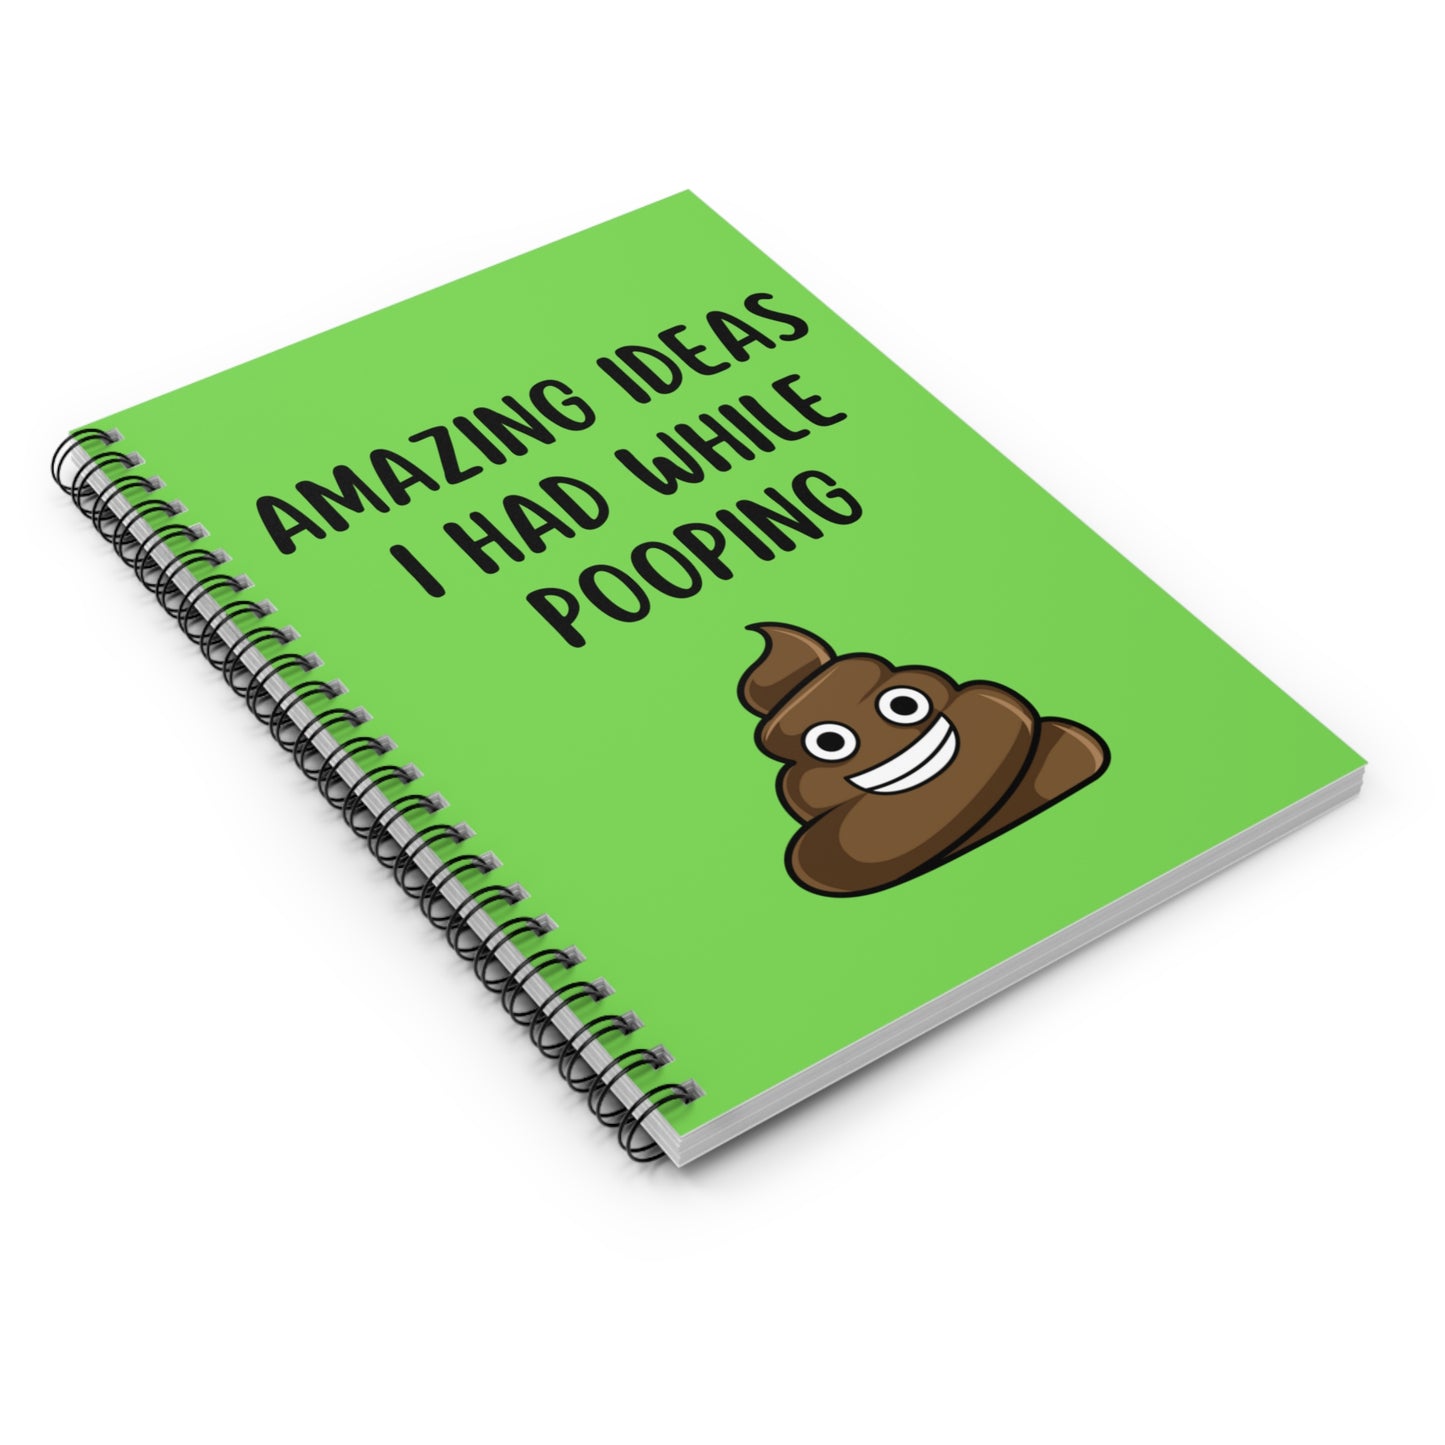 Amazing Ideas I had While Pooping Notebook, Funny NoteBook, Funny Toilet Humor Notebook, Funny Poo Journal Gift, Coworker Gift Stationery